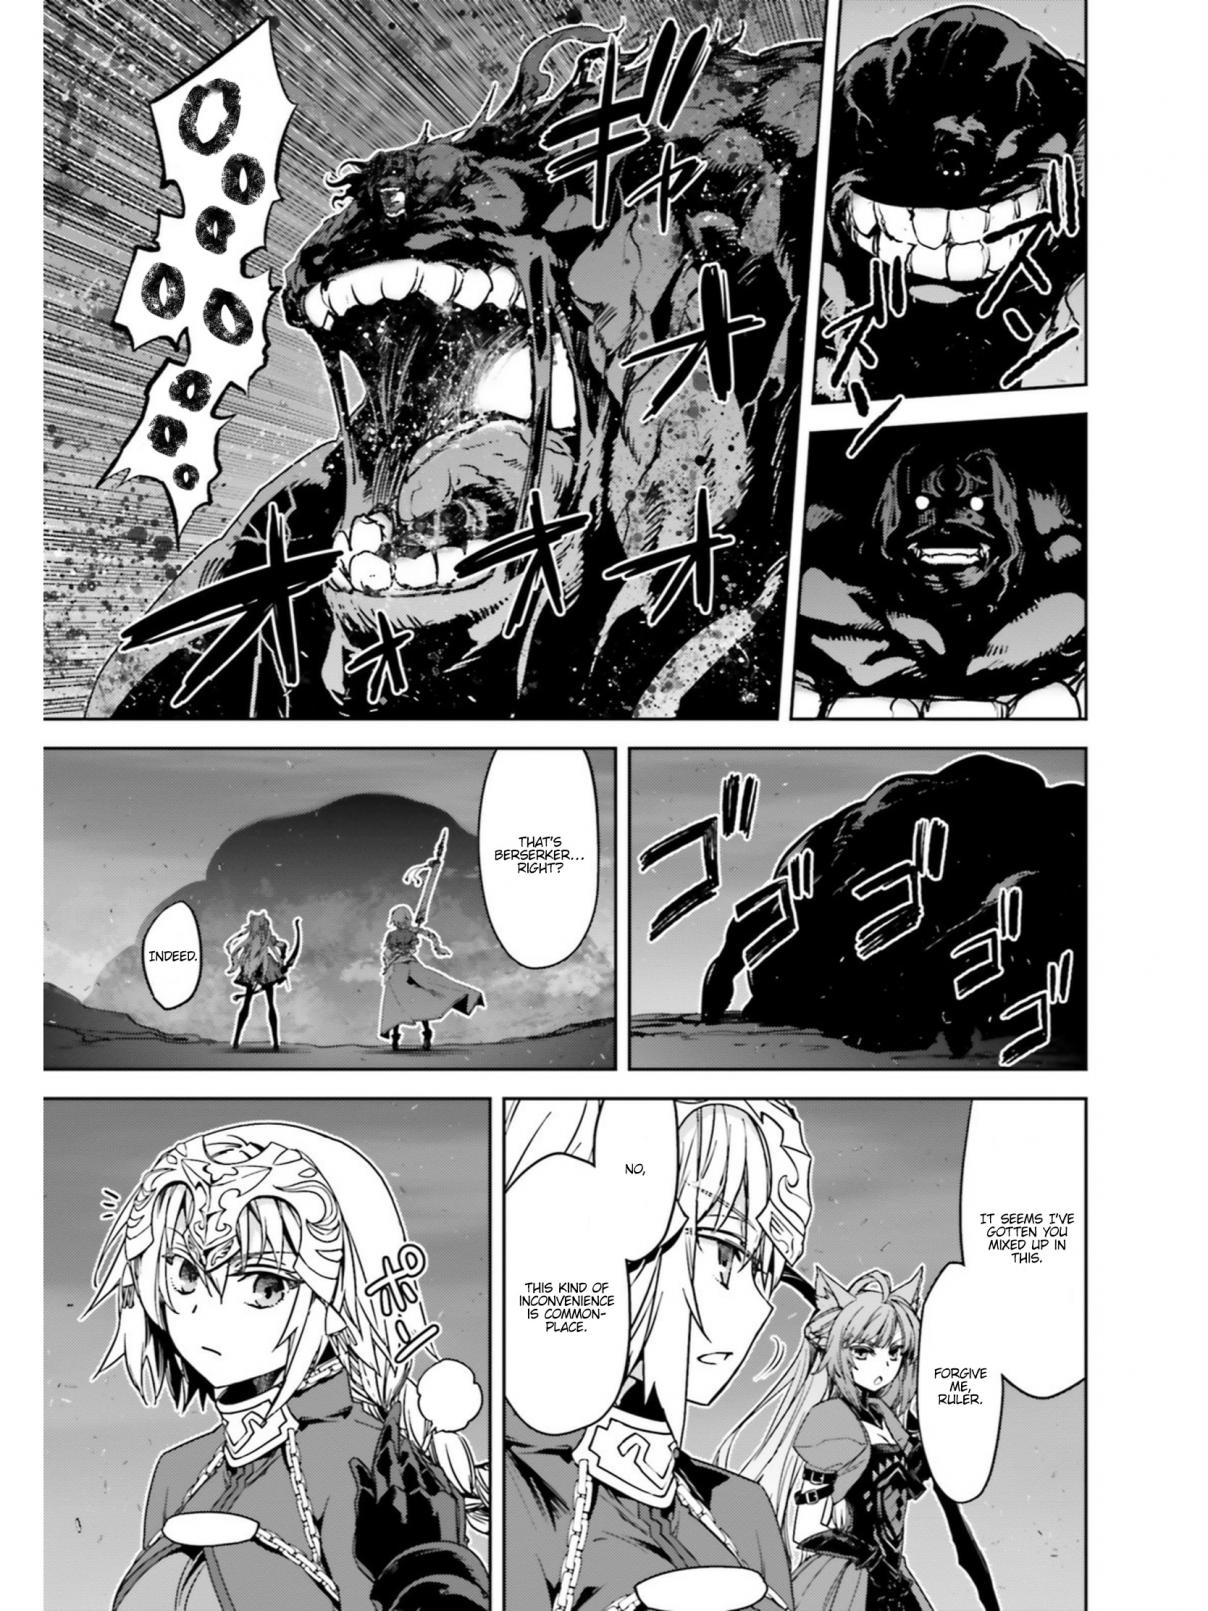 Fate/Apocrypha Ch. 24 Episode